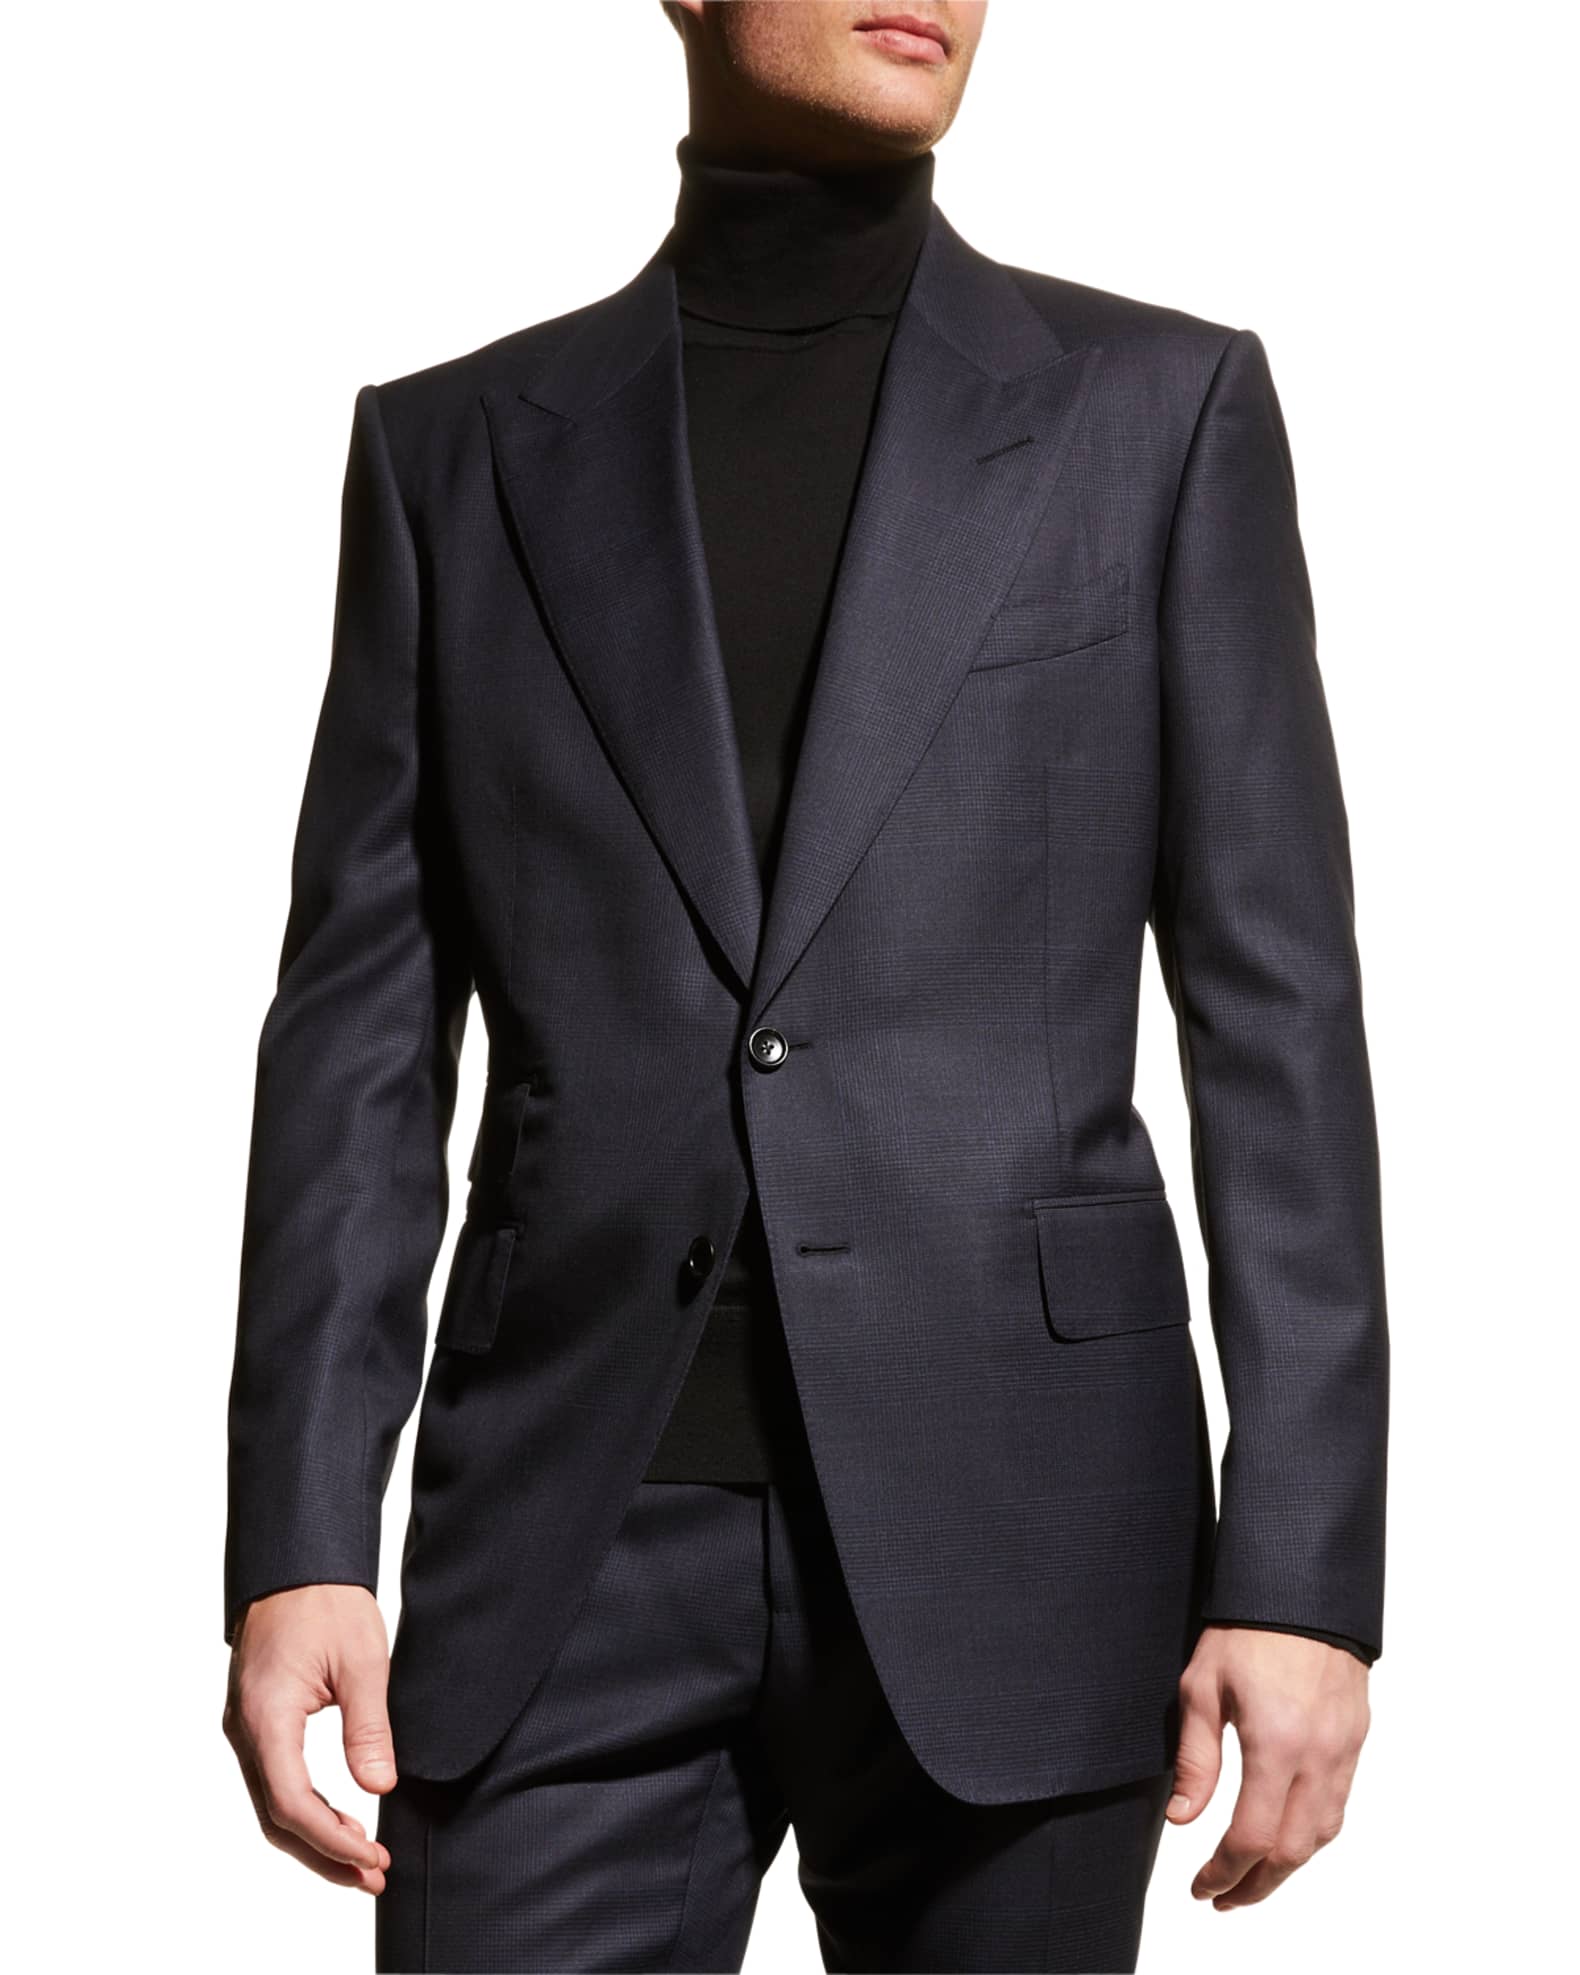 TOM FORD Men's Prince of Wales Wool Suit | Neiman Marcus